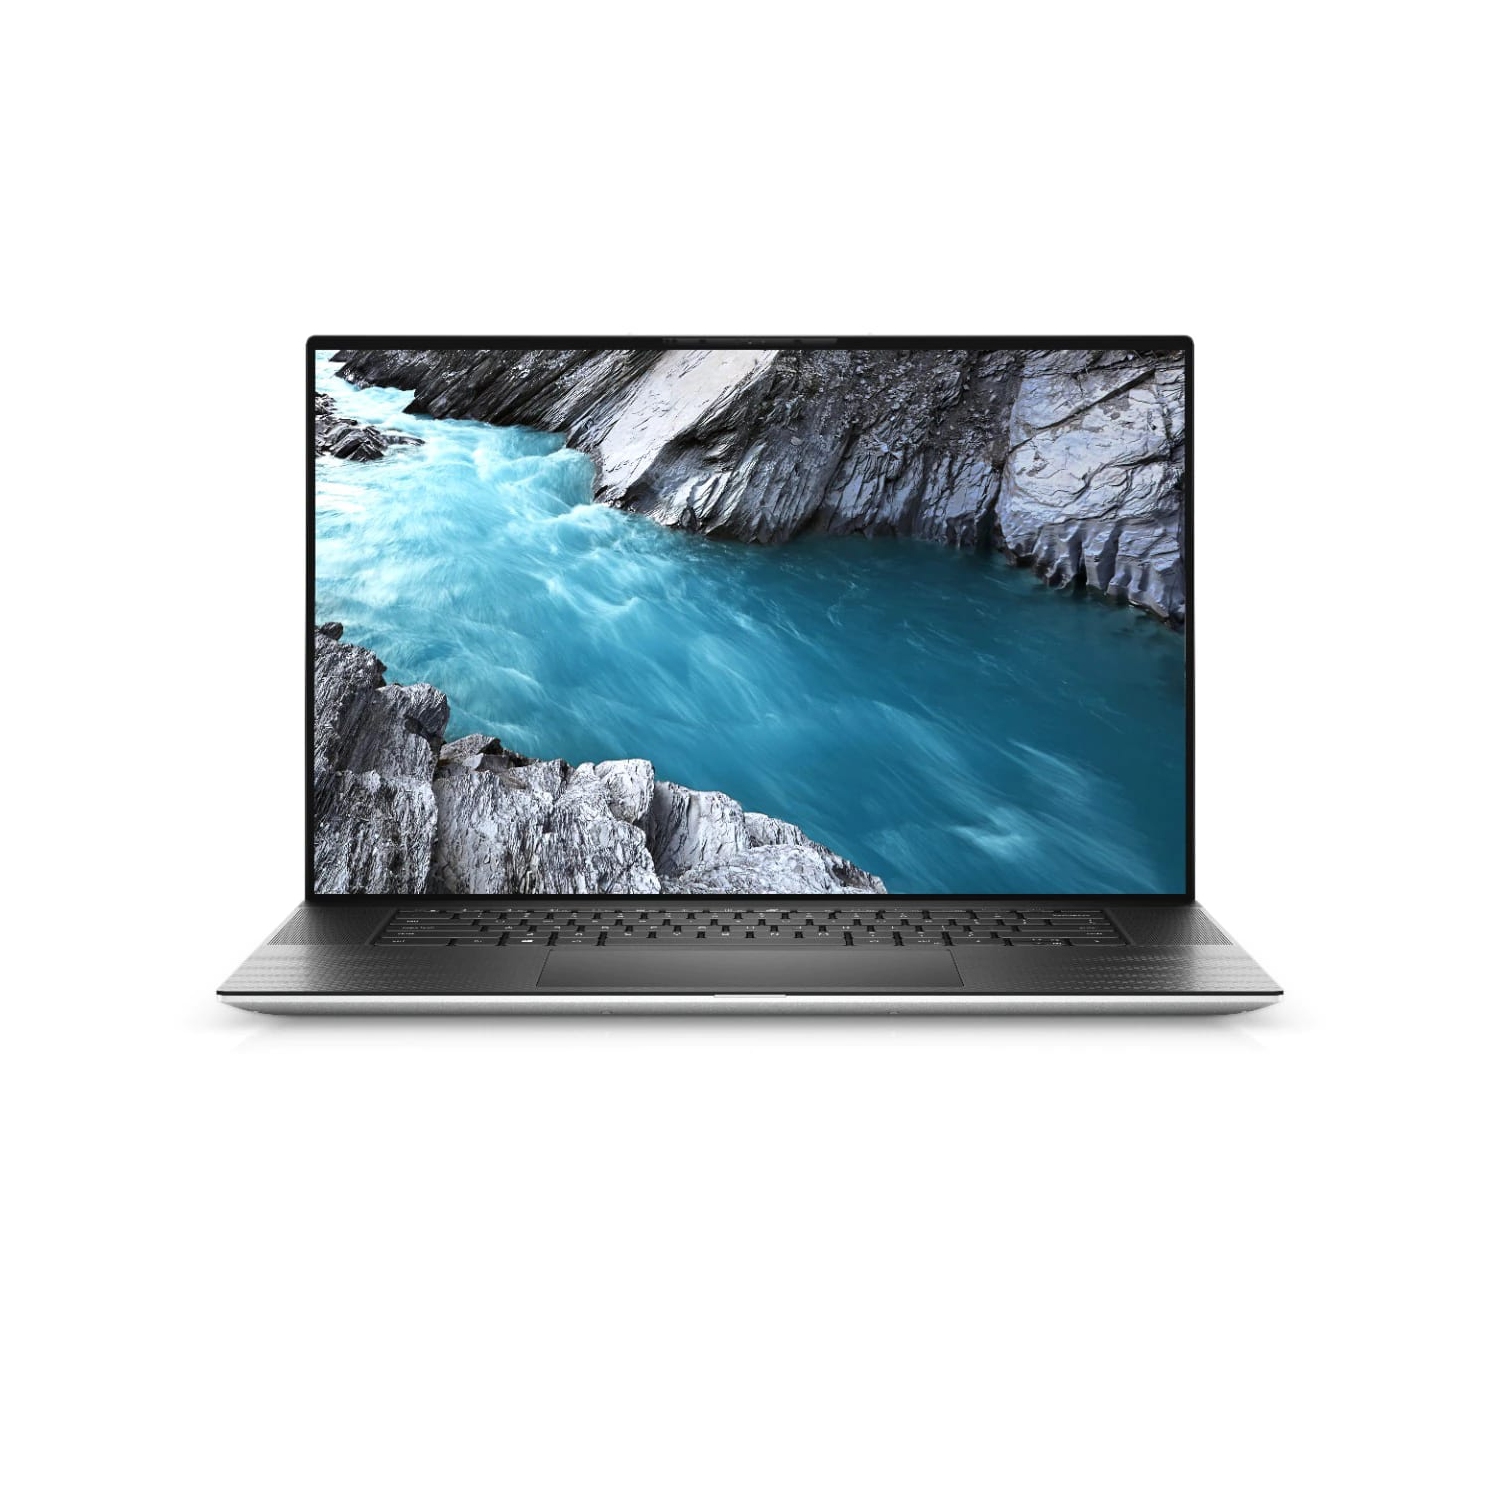 Refurbished (Excellent) - Dell XPS 17 9700 Laptop (2020), 17" 4K Touch, Core i7 - 512GB SSD - 32GB RAM - RTX 2060, 8 Cores @ 5.1 GHz - 10th Gen CPU Certified Refurbished